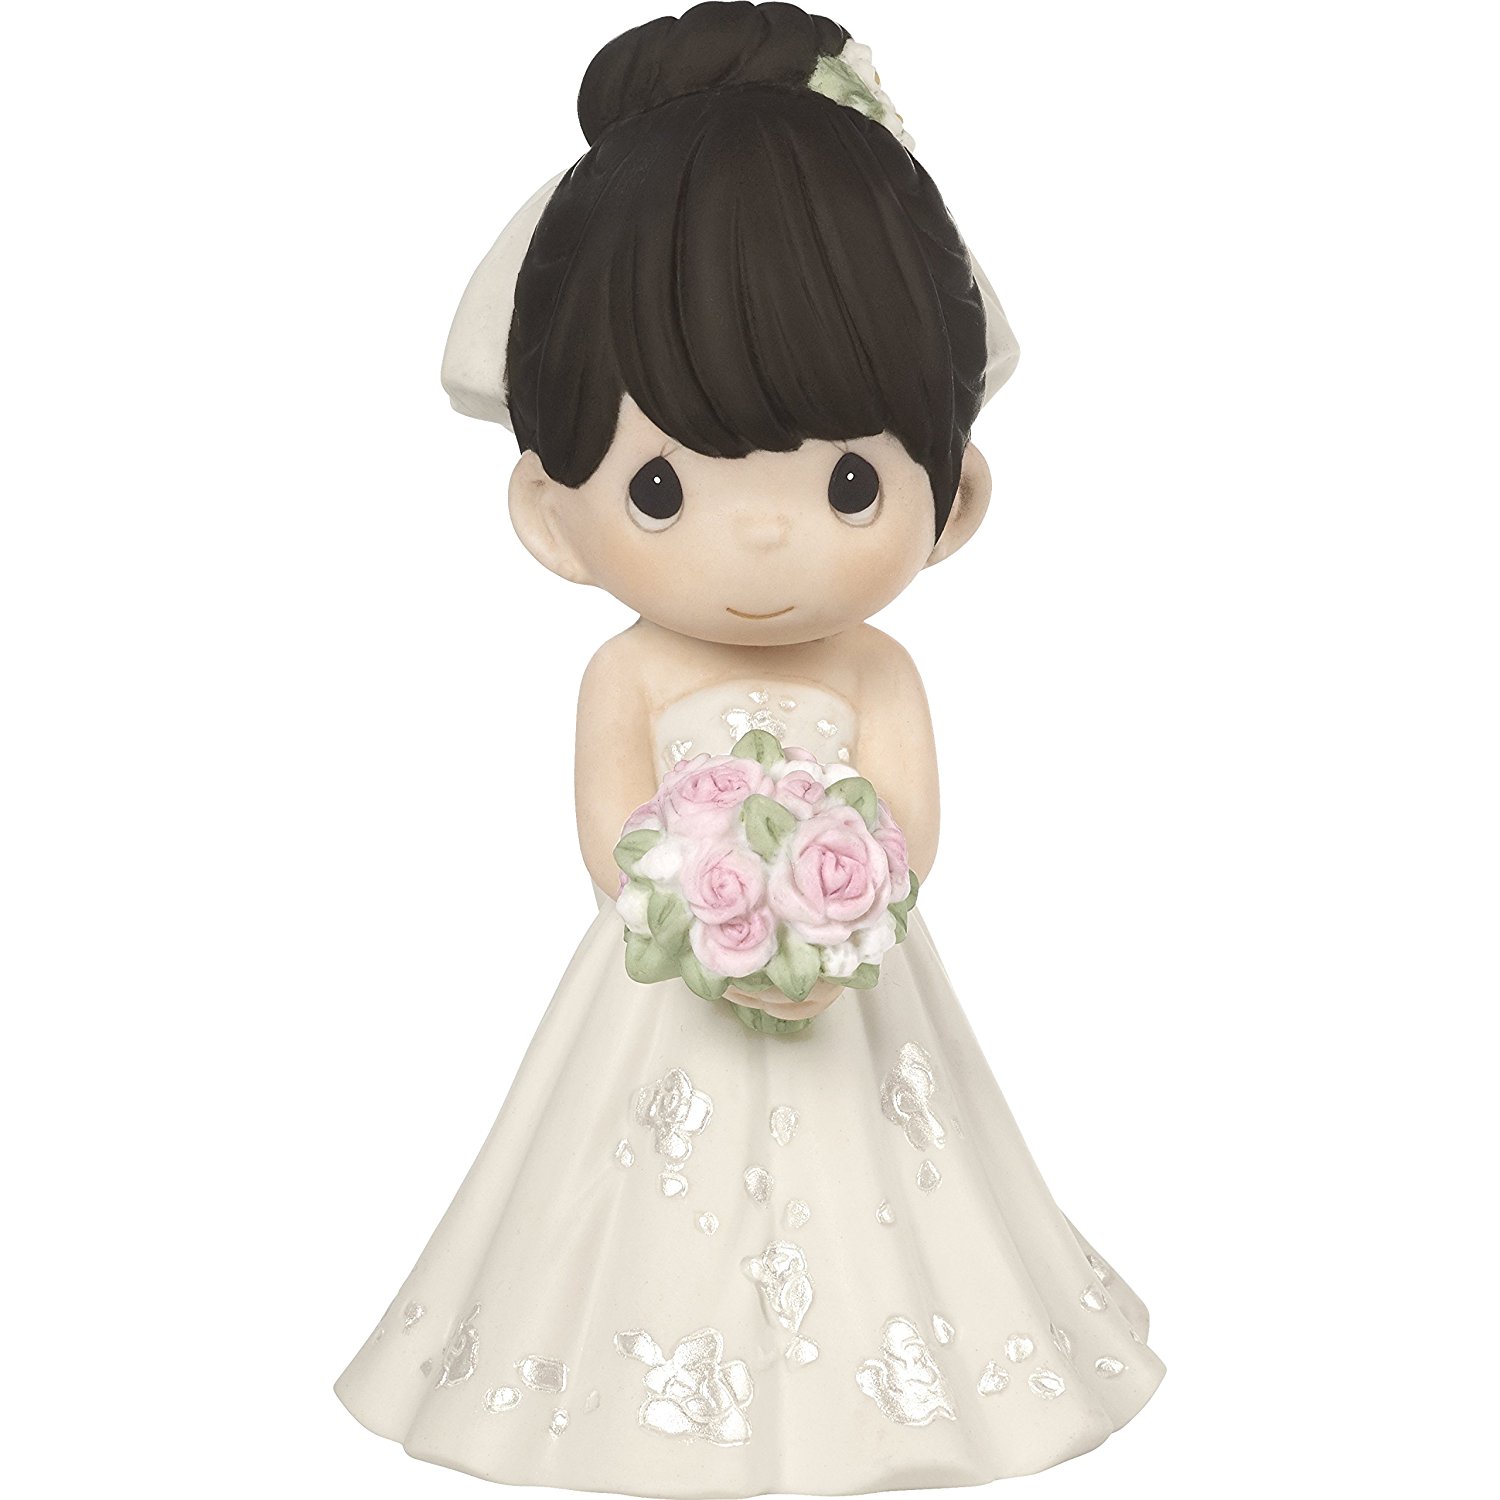 Precious Moments Bride - Black Hair with Light Skin Tone Cake Topper